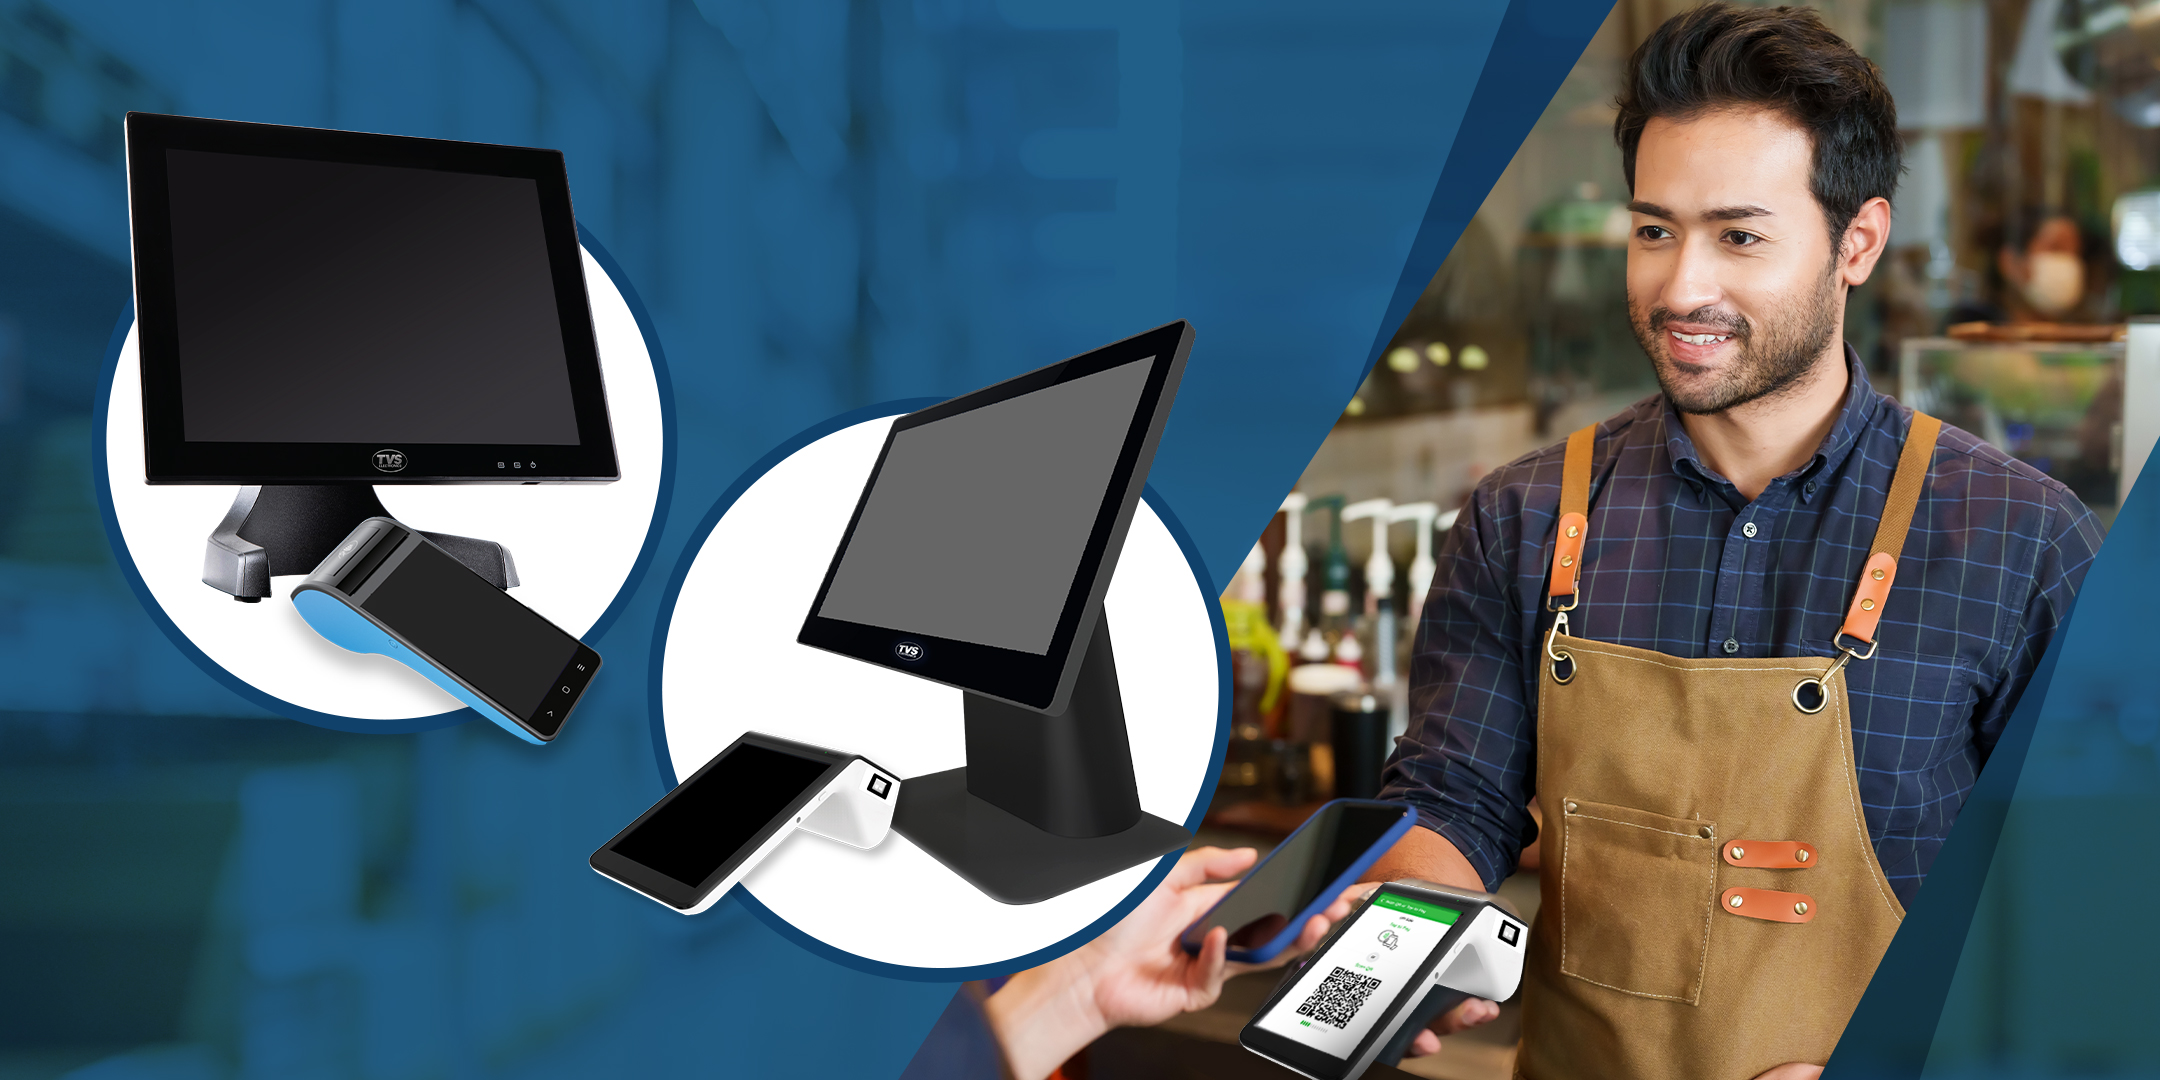 The best POS software + hardware combo for your retail business